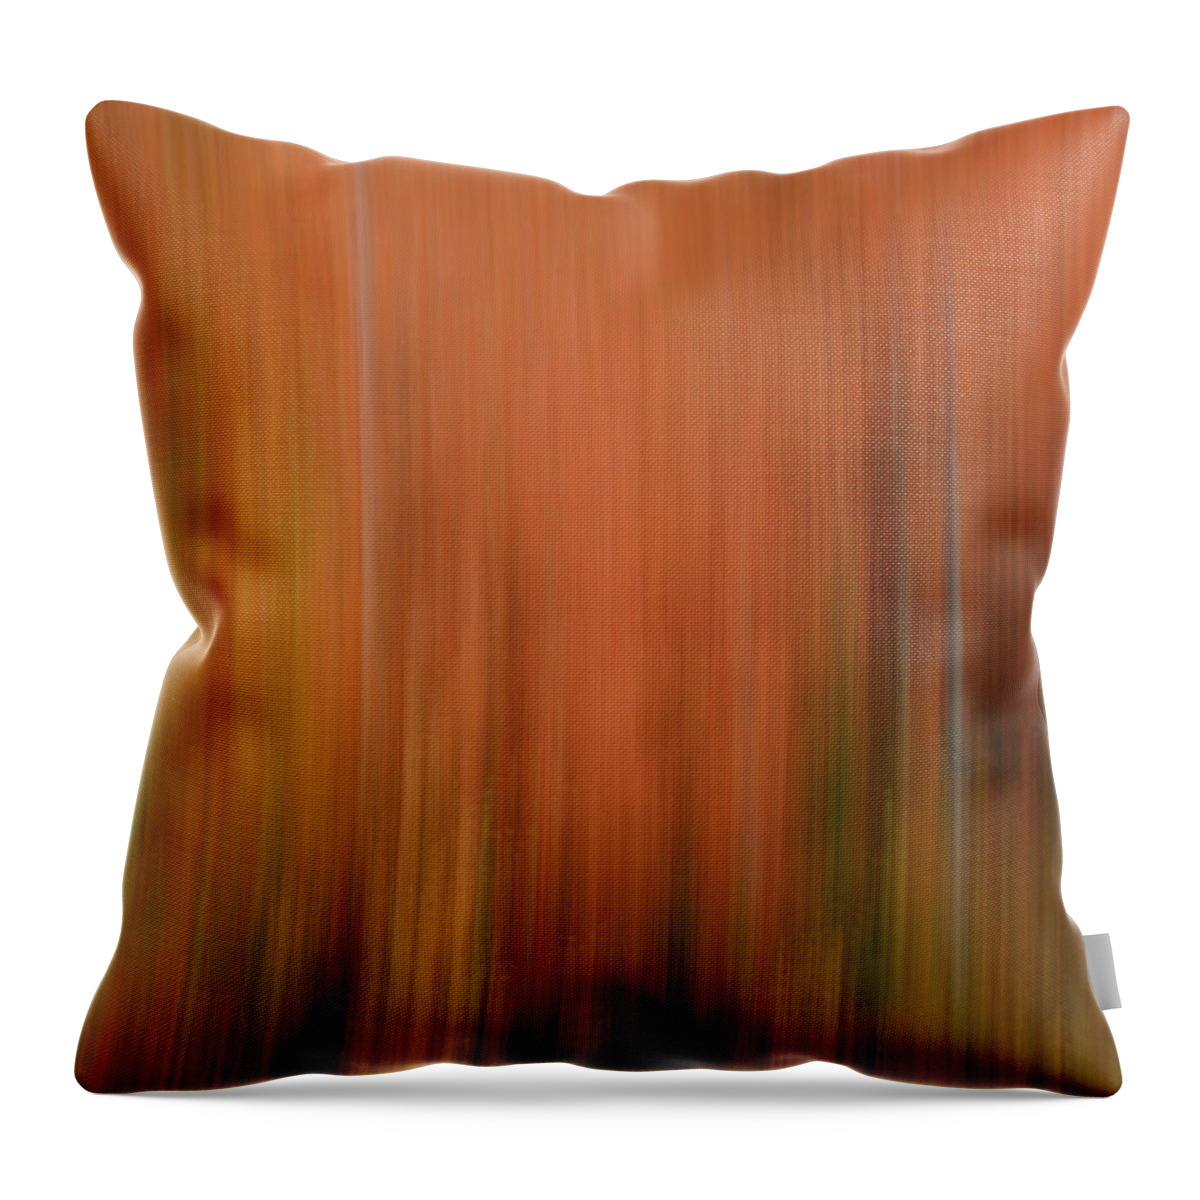 Autumn Throw Pillow featuring the photograph Forest Illusions- Autumnal Fire by Whispering Peaks Photography